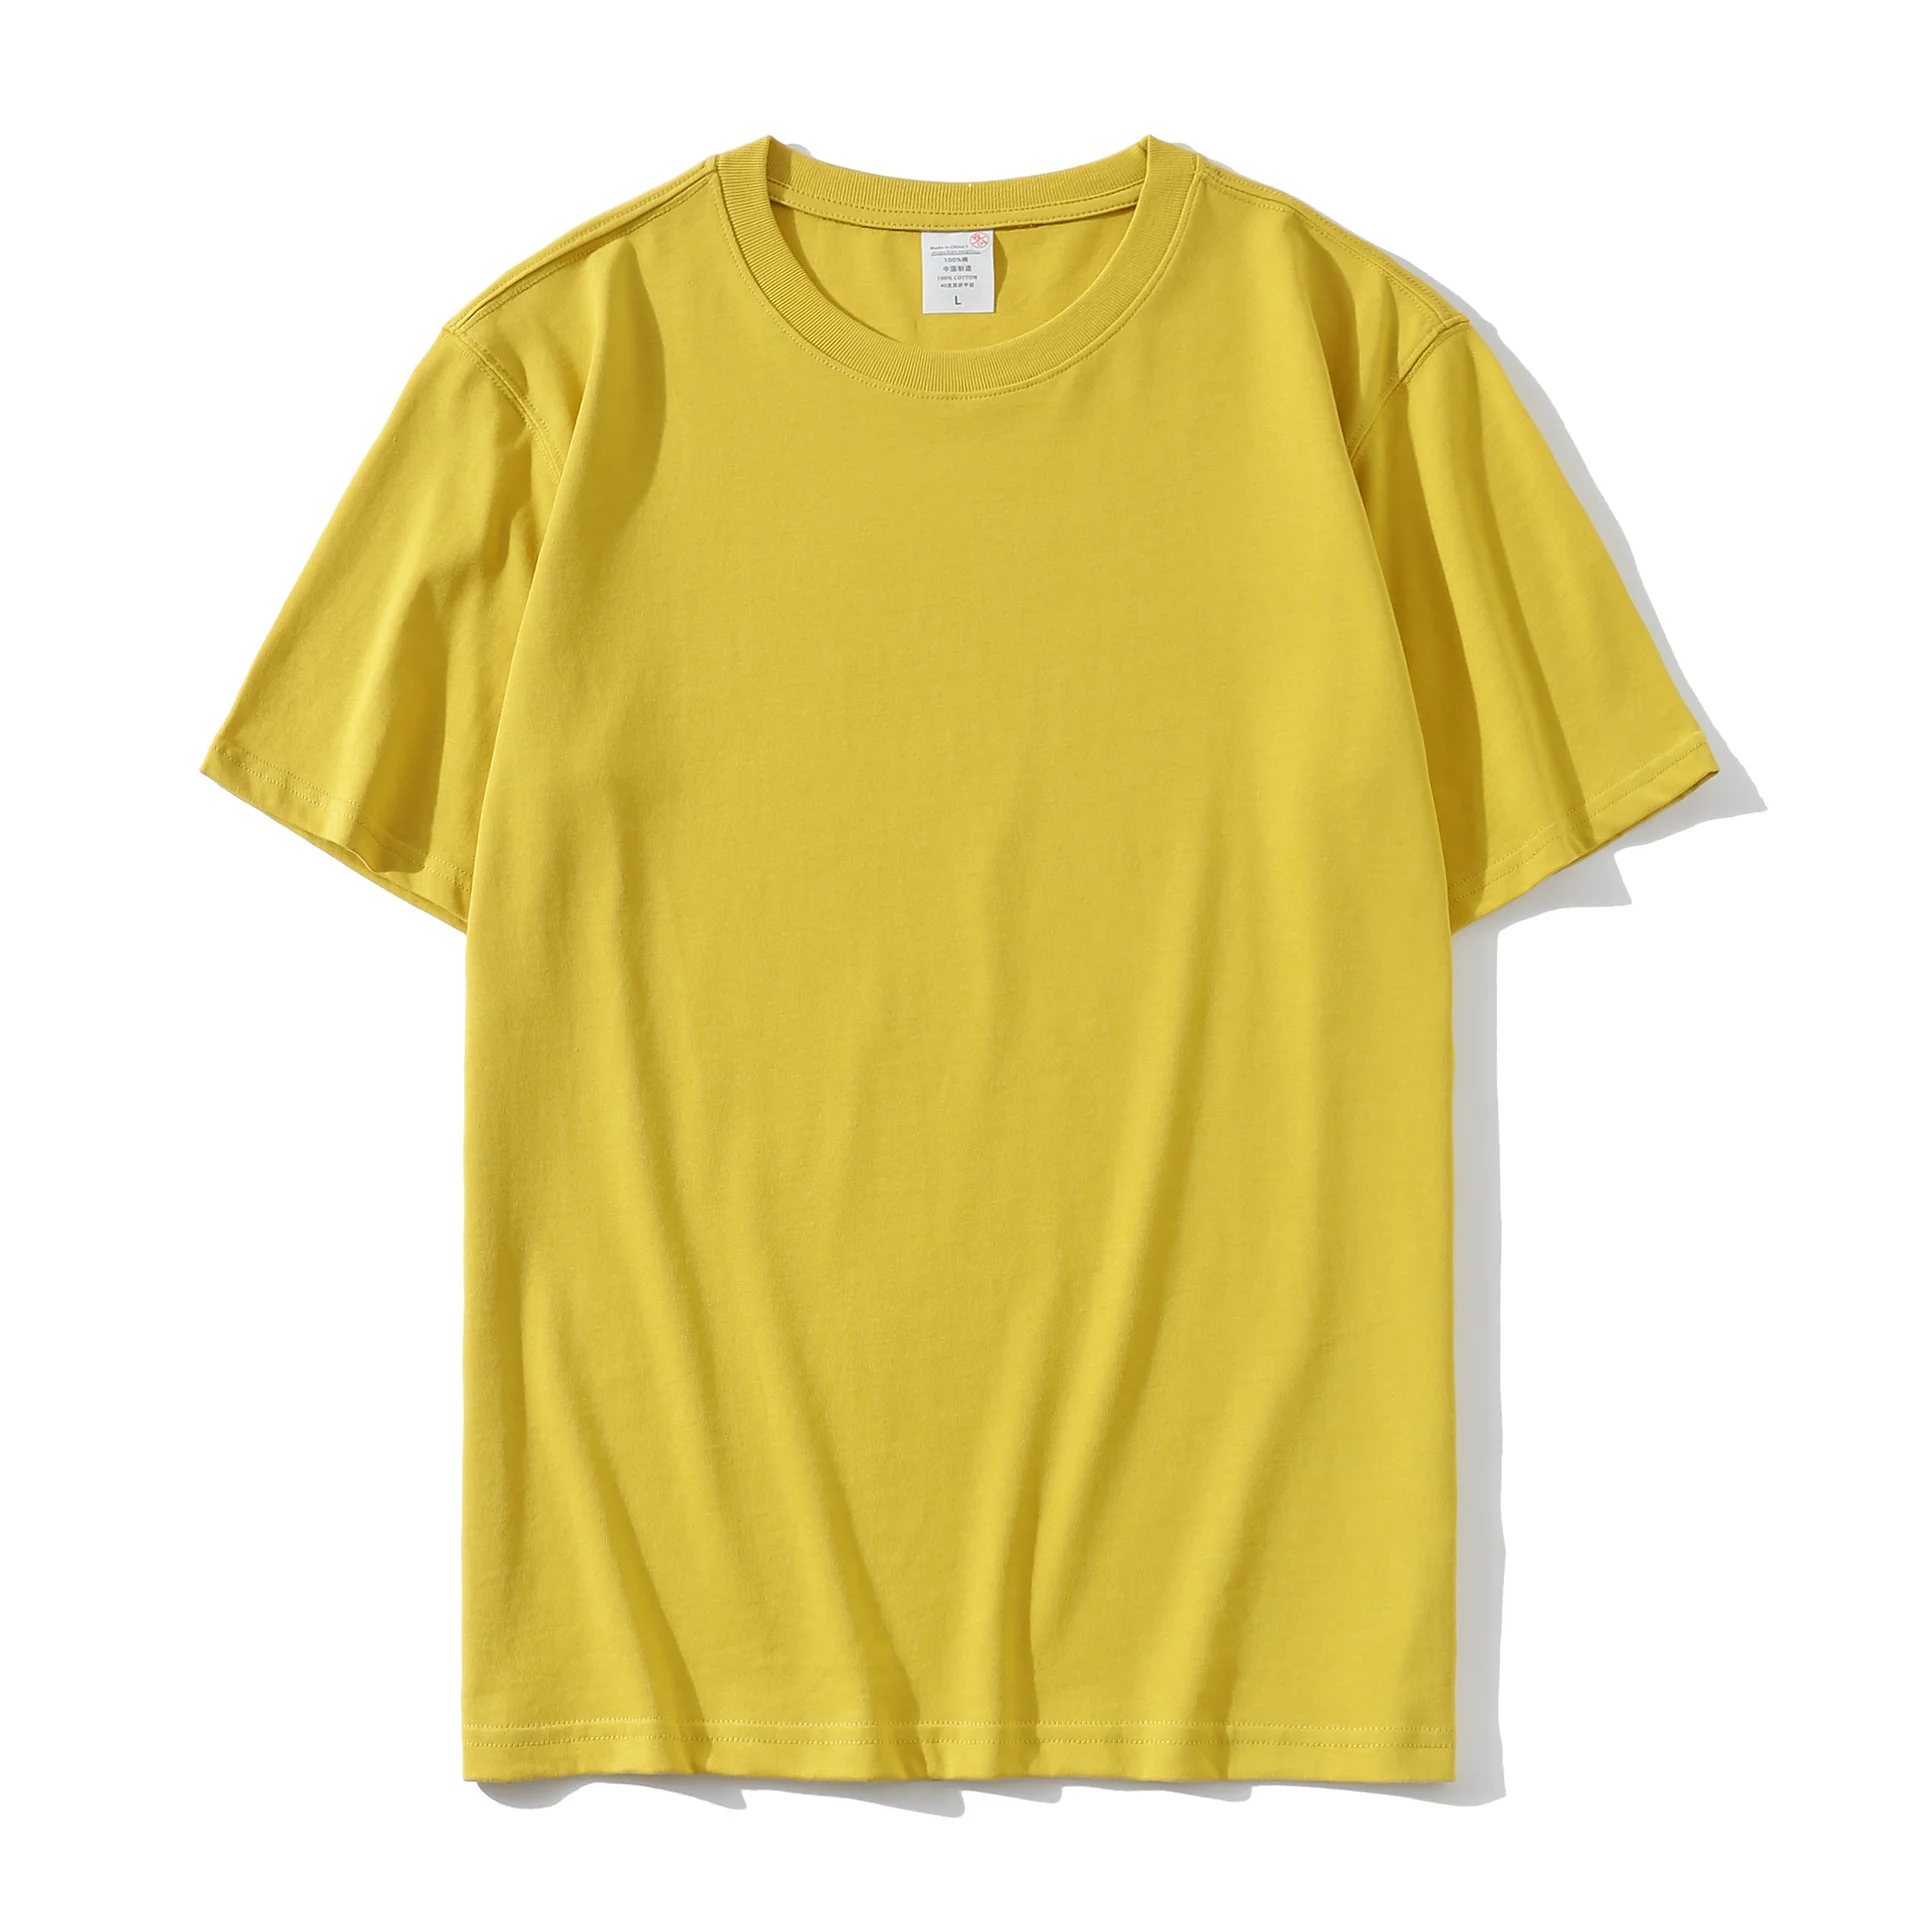 Wholesale Blank T shirts for Printing in Chicago